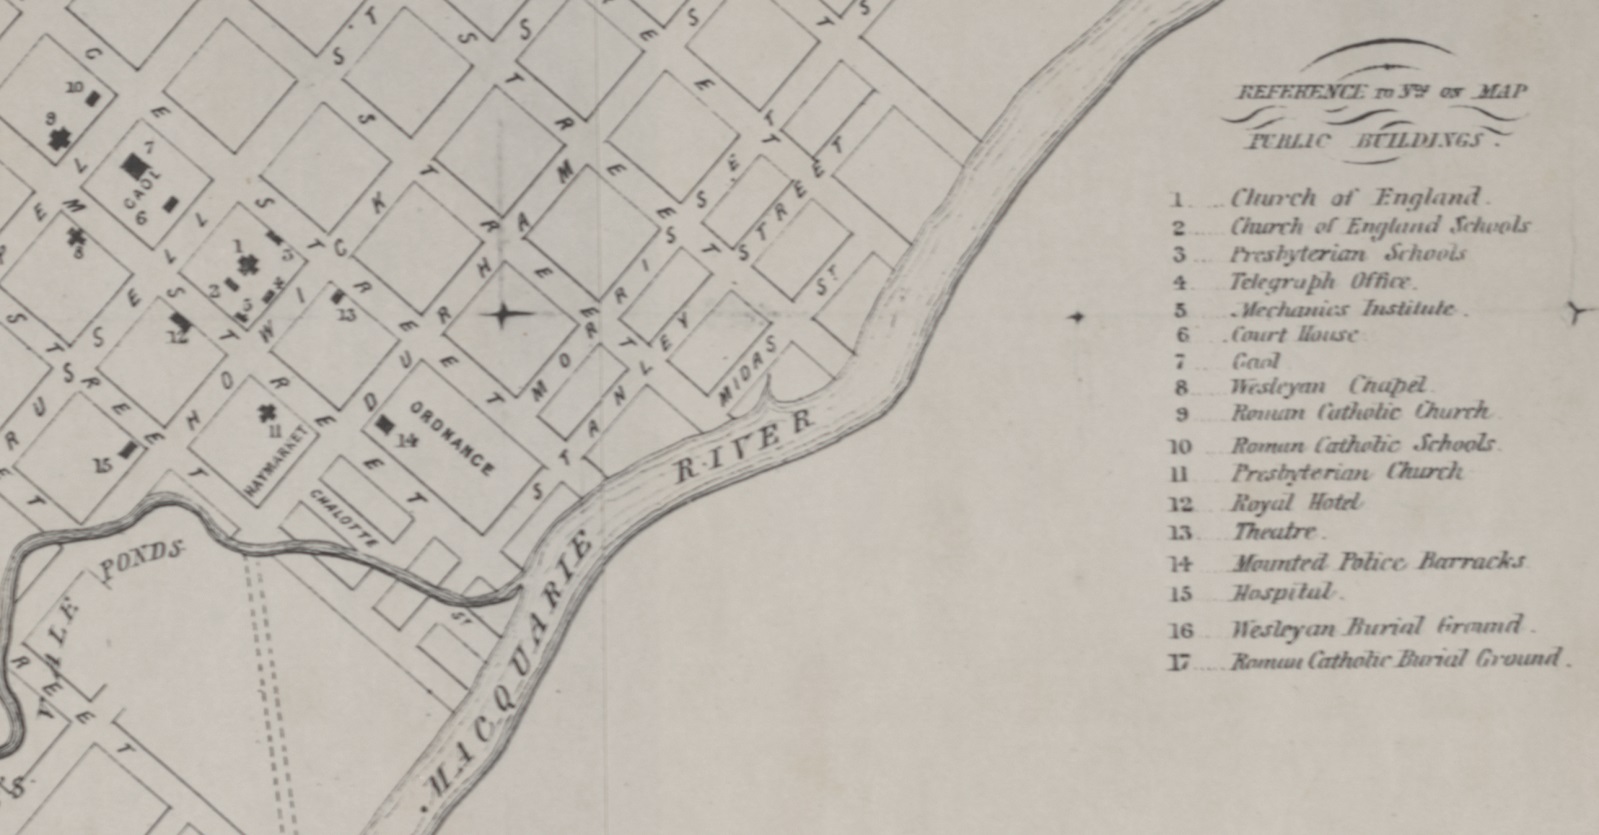 1862 - The first Commercial Map of Bathurst